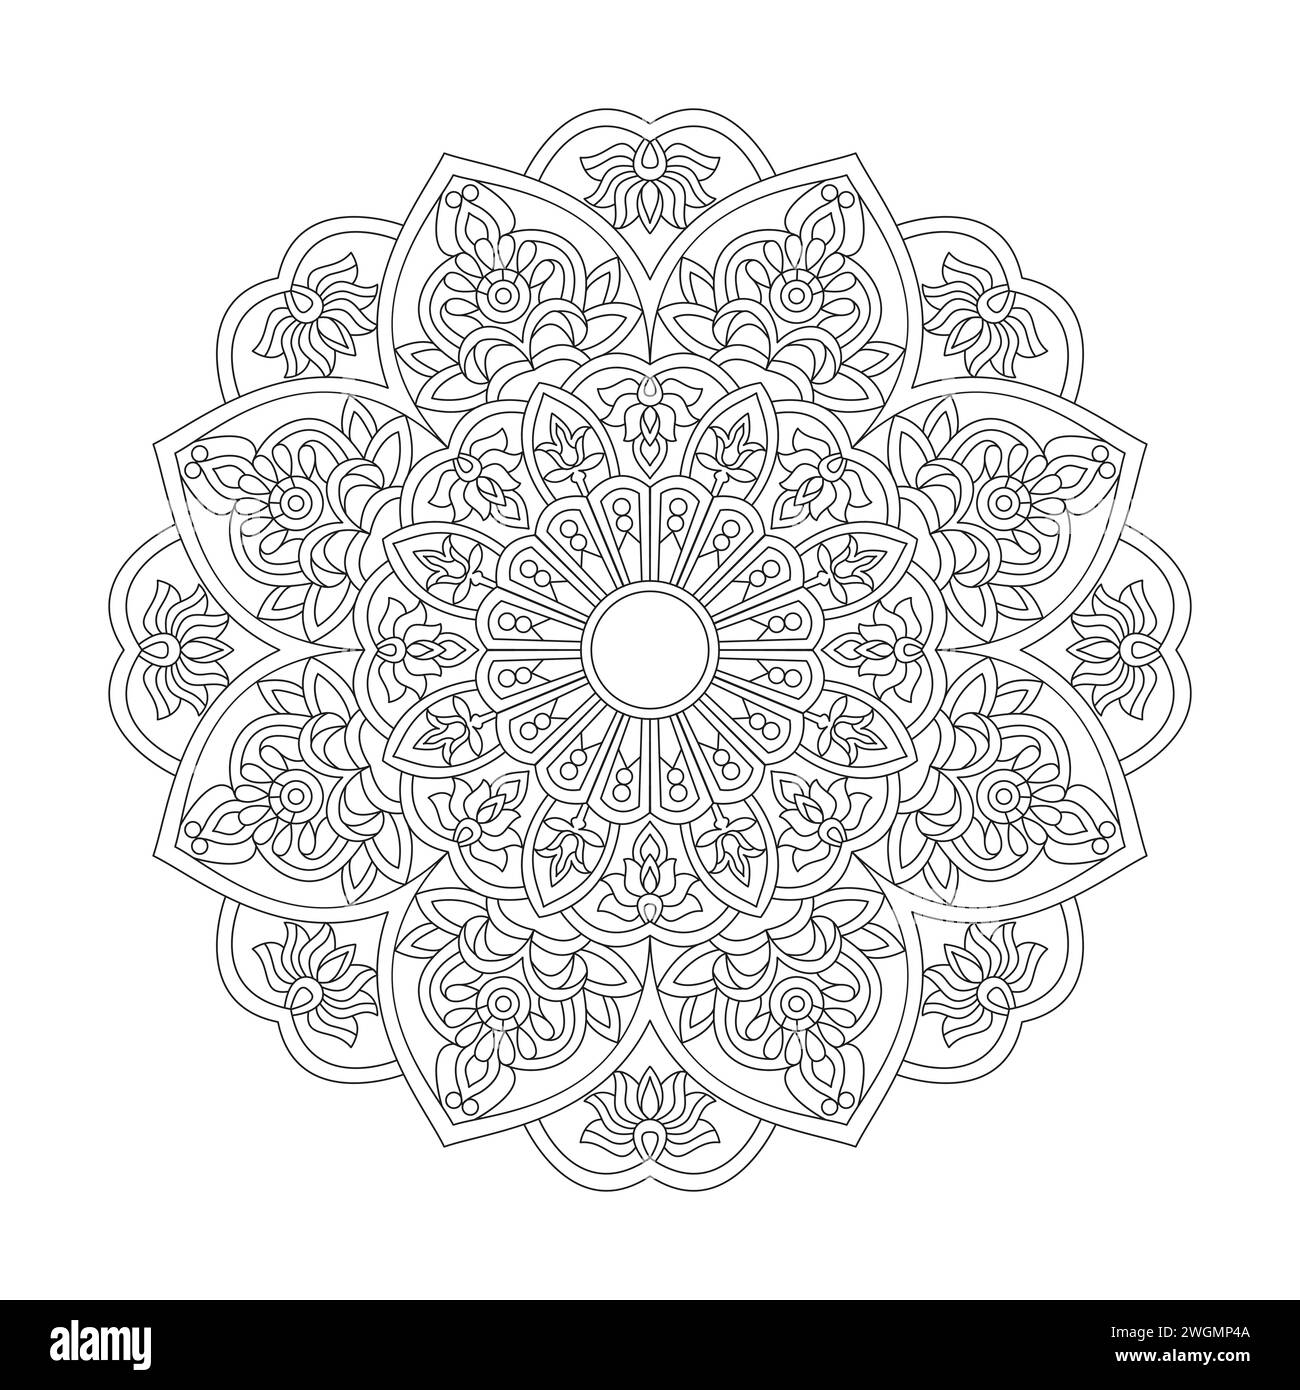 Attractive Floral Mandala Coloring Book Page for kdp Book Interior. Peaceful Petals, Ability to Relax, Brain Experiences, Harmonious Haven, Peaceful P Stock Vector